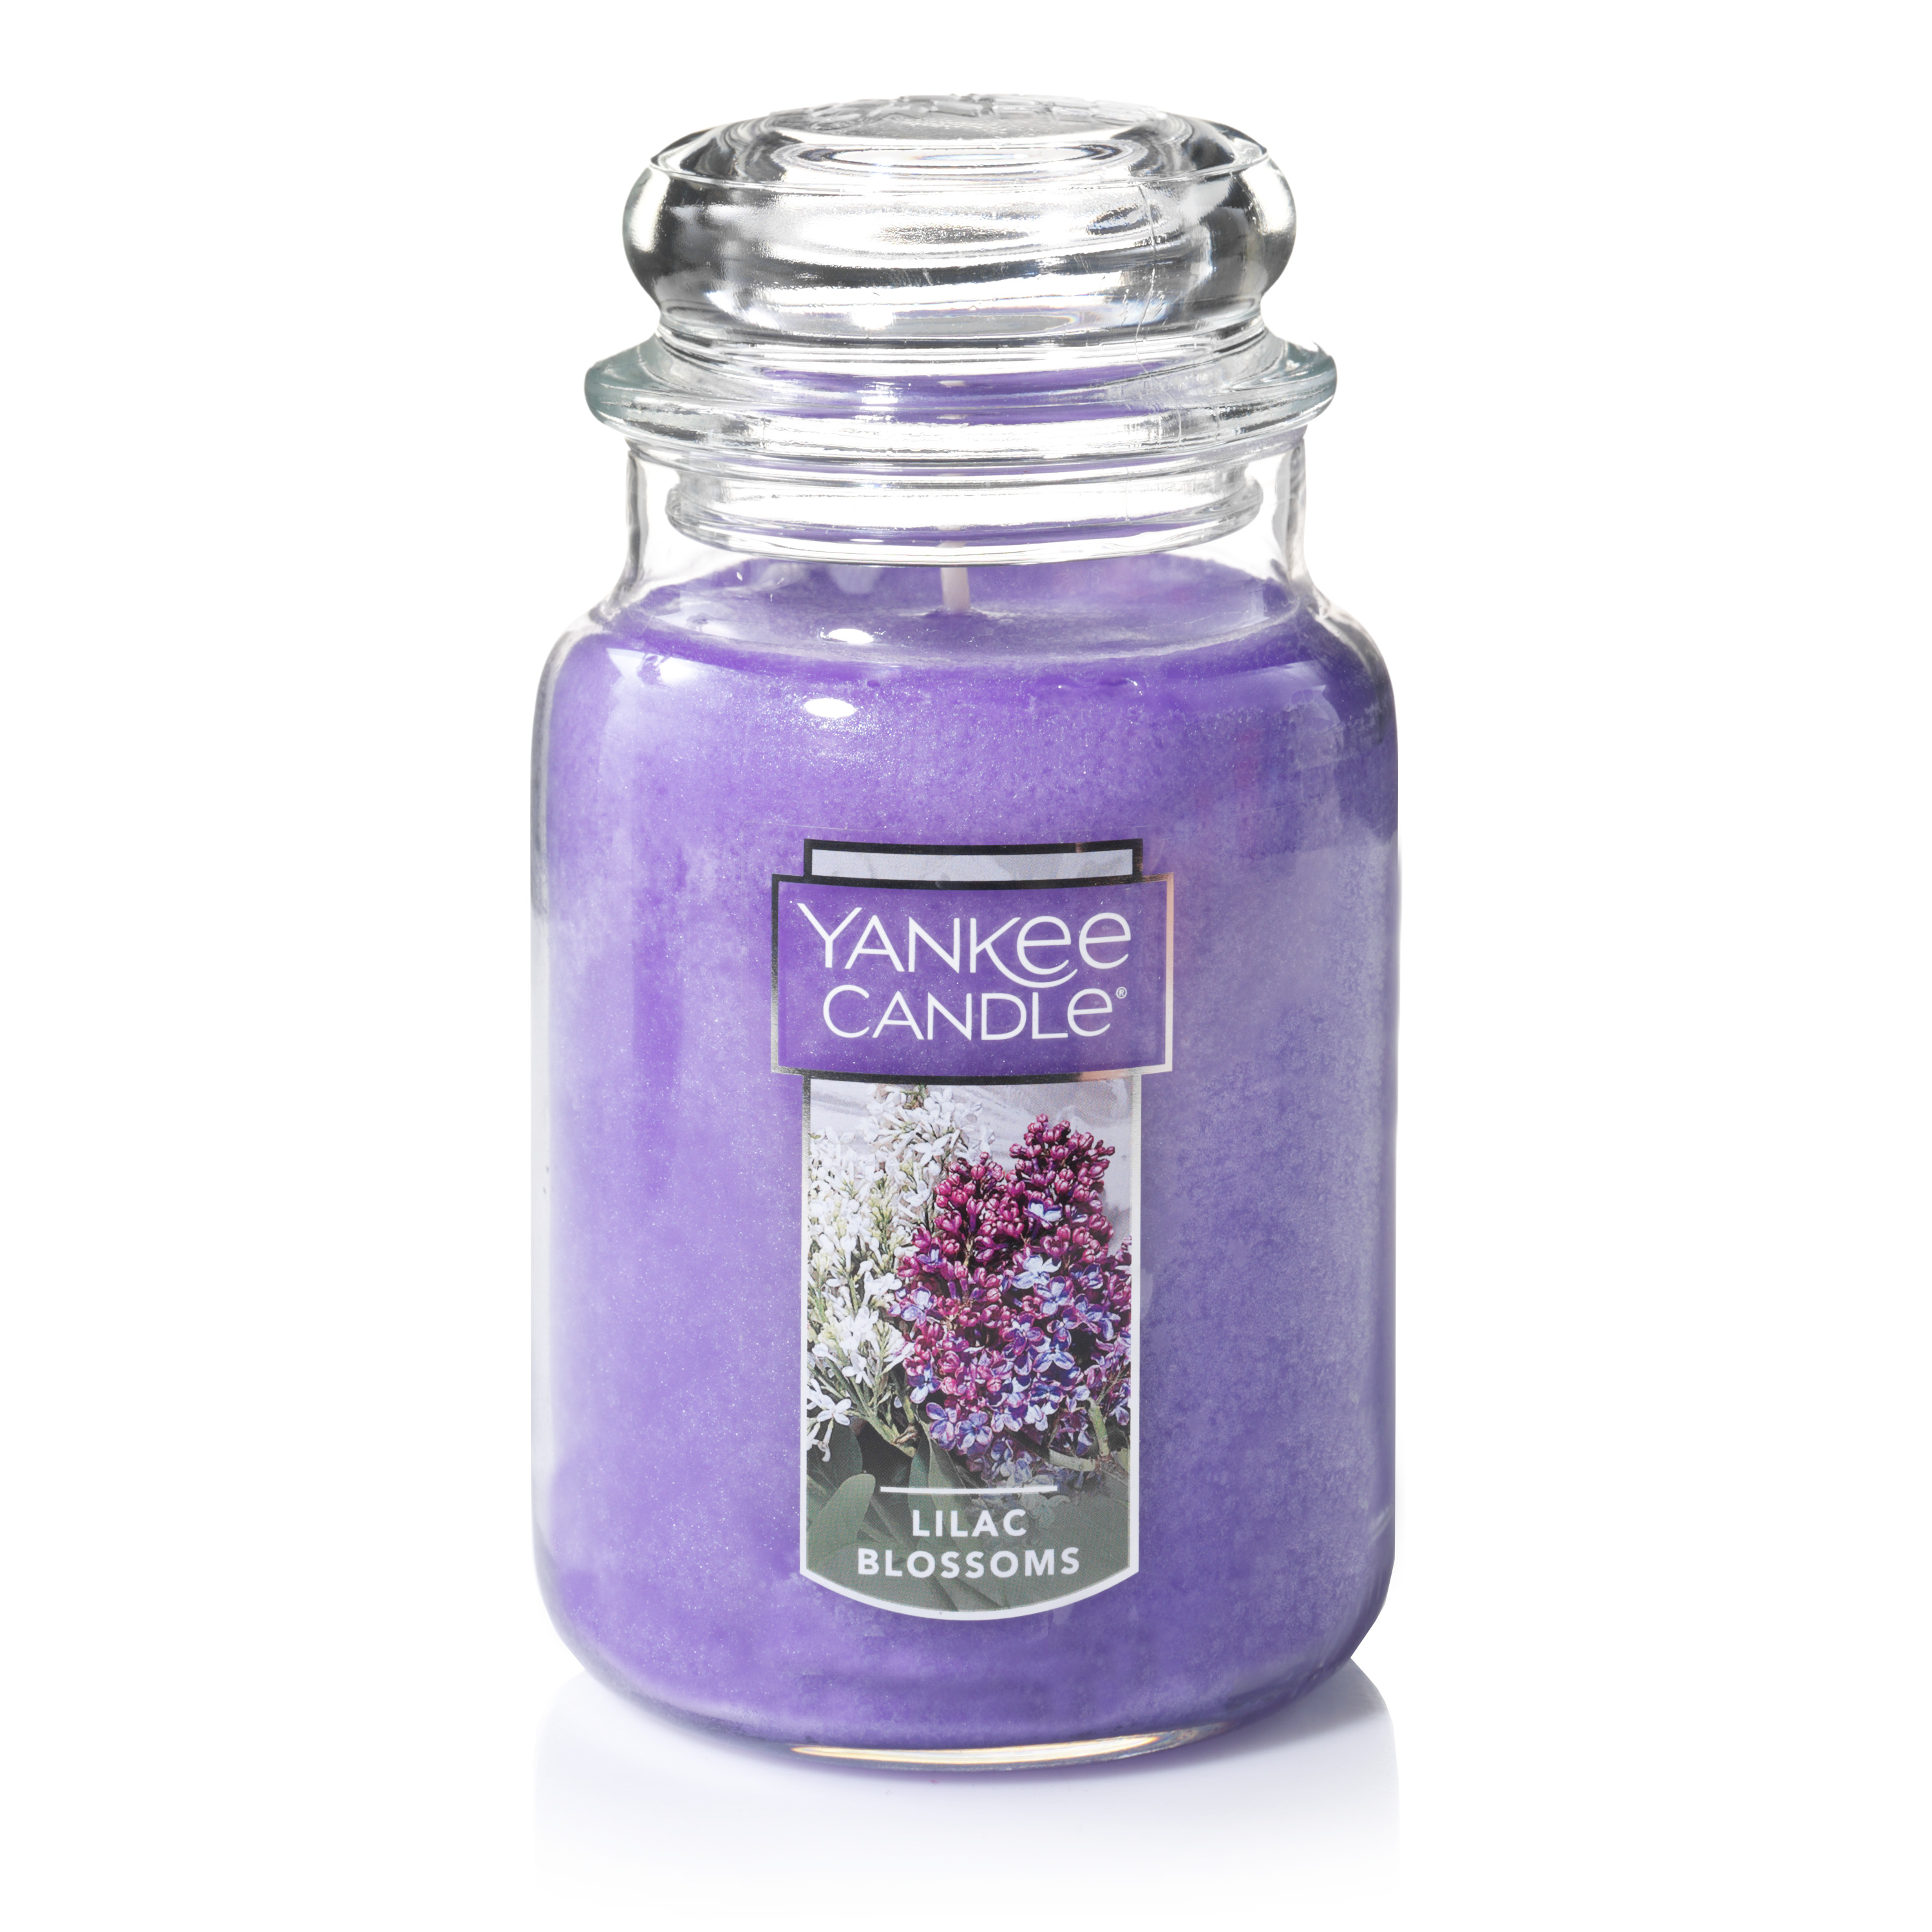 Yankee Candle Lilac Blossoms - 22 oz Original Large Jar Scented Candle - image 1 of 7